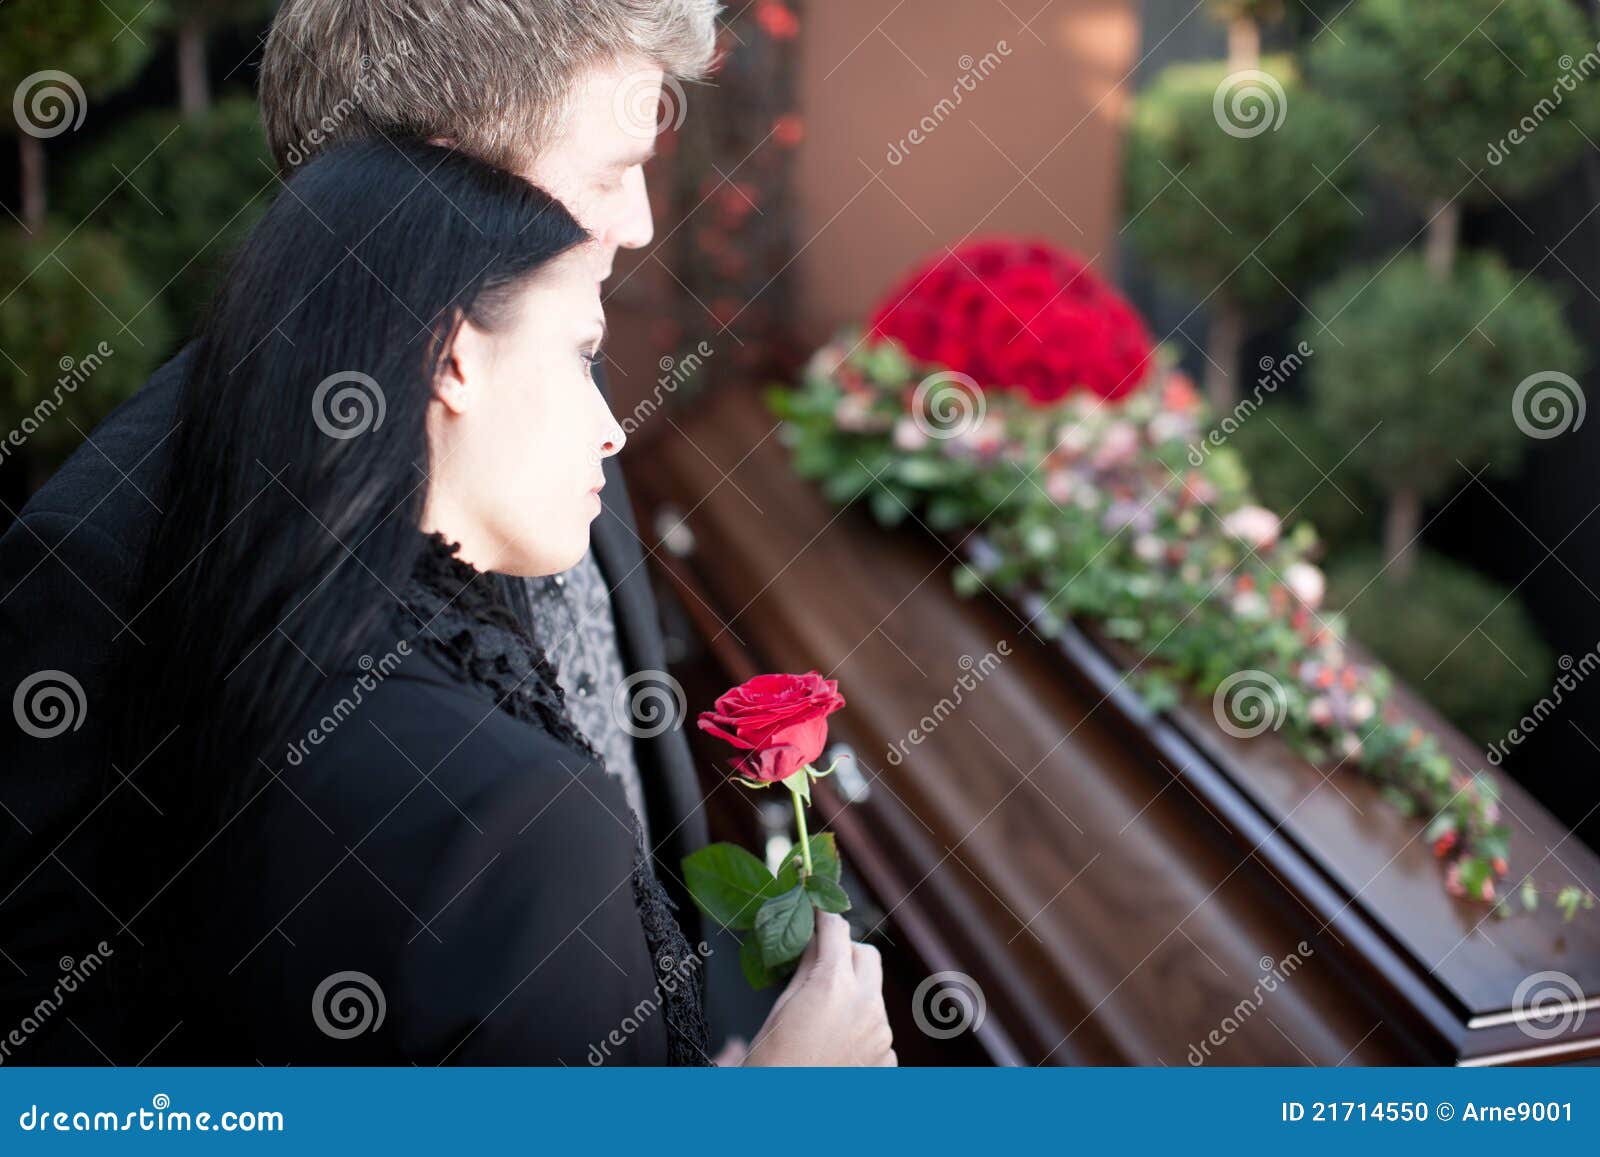 people at funeral with coffin